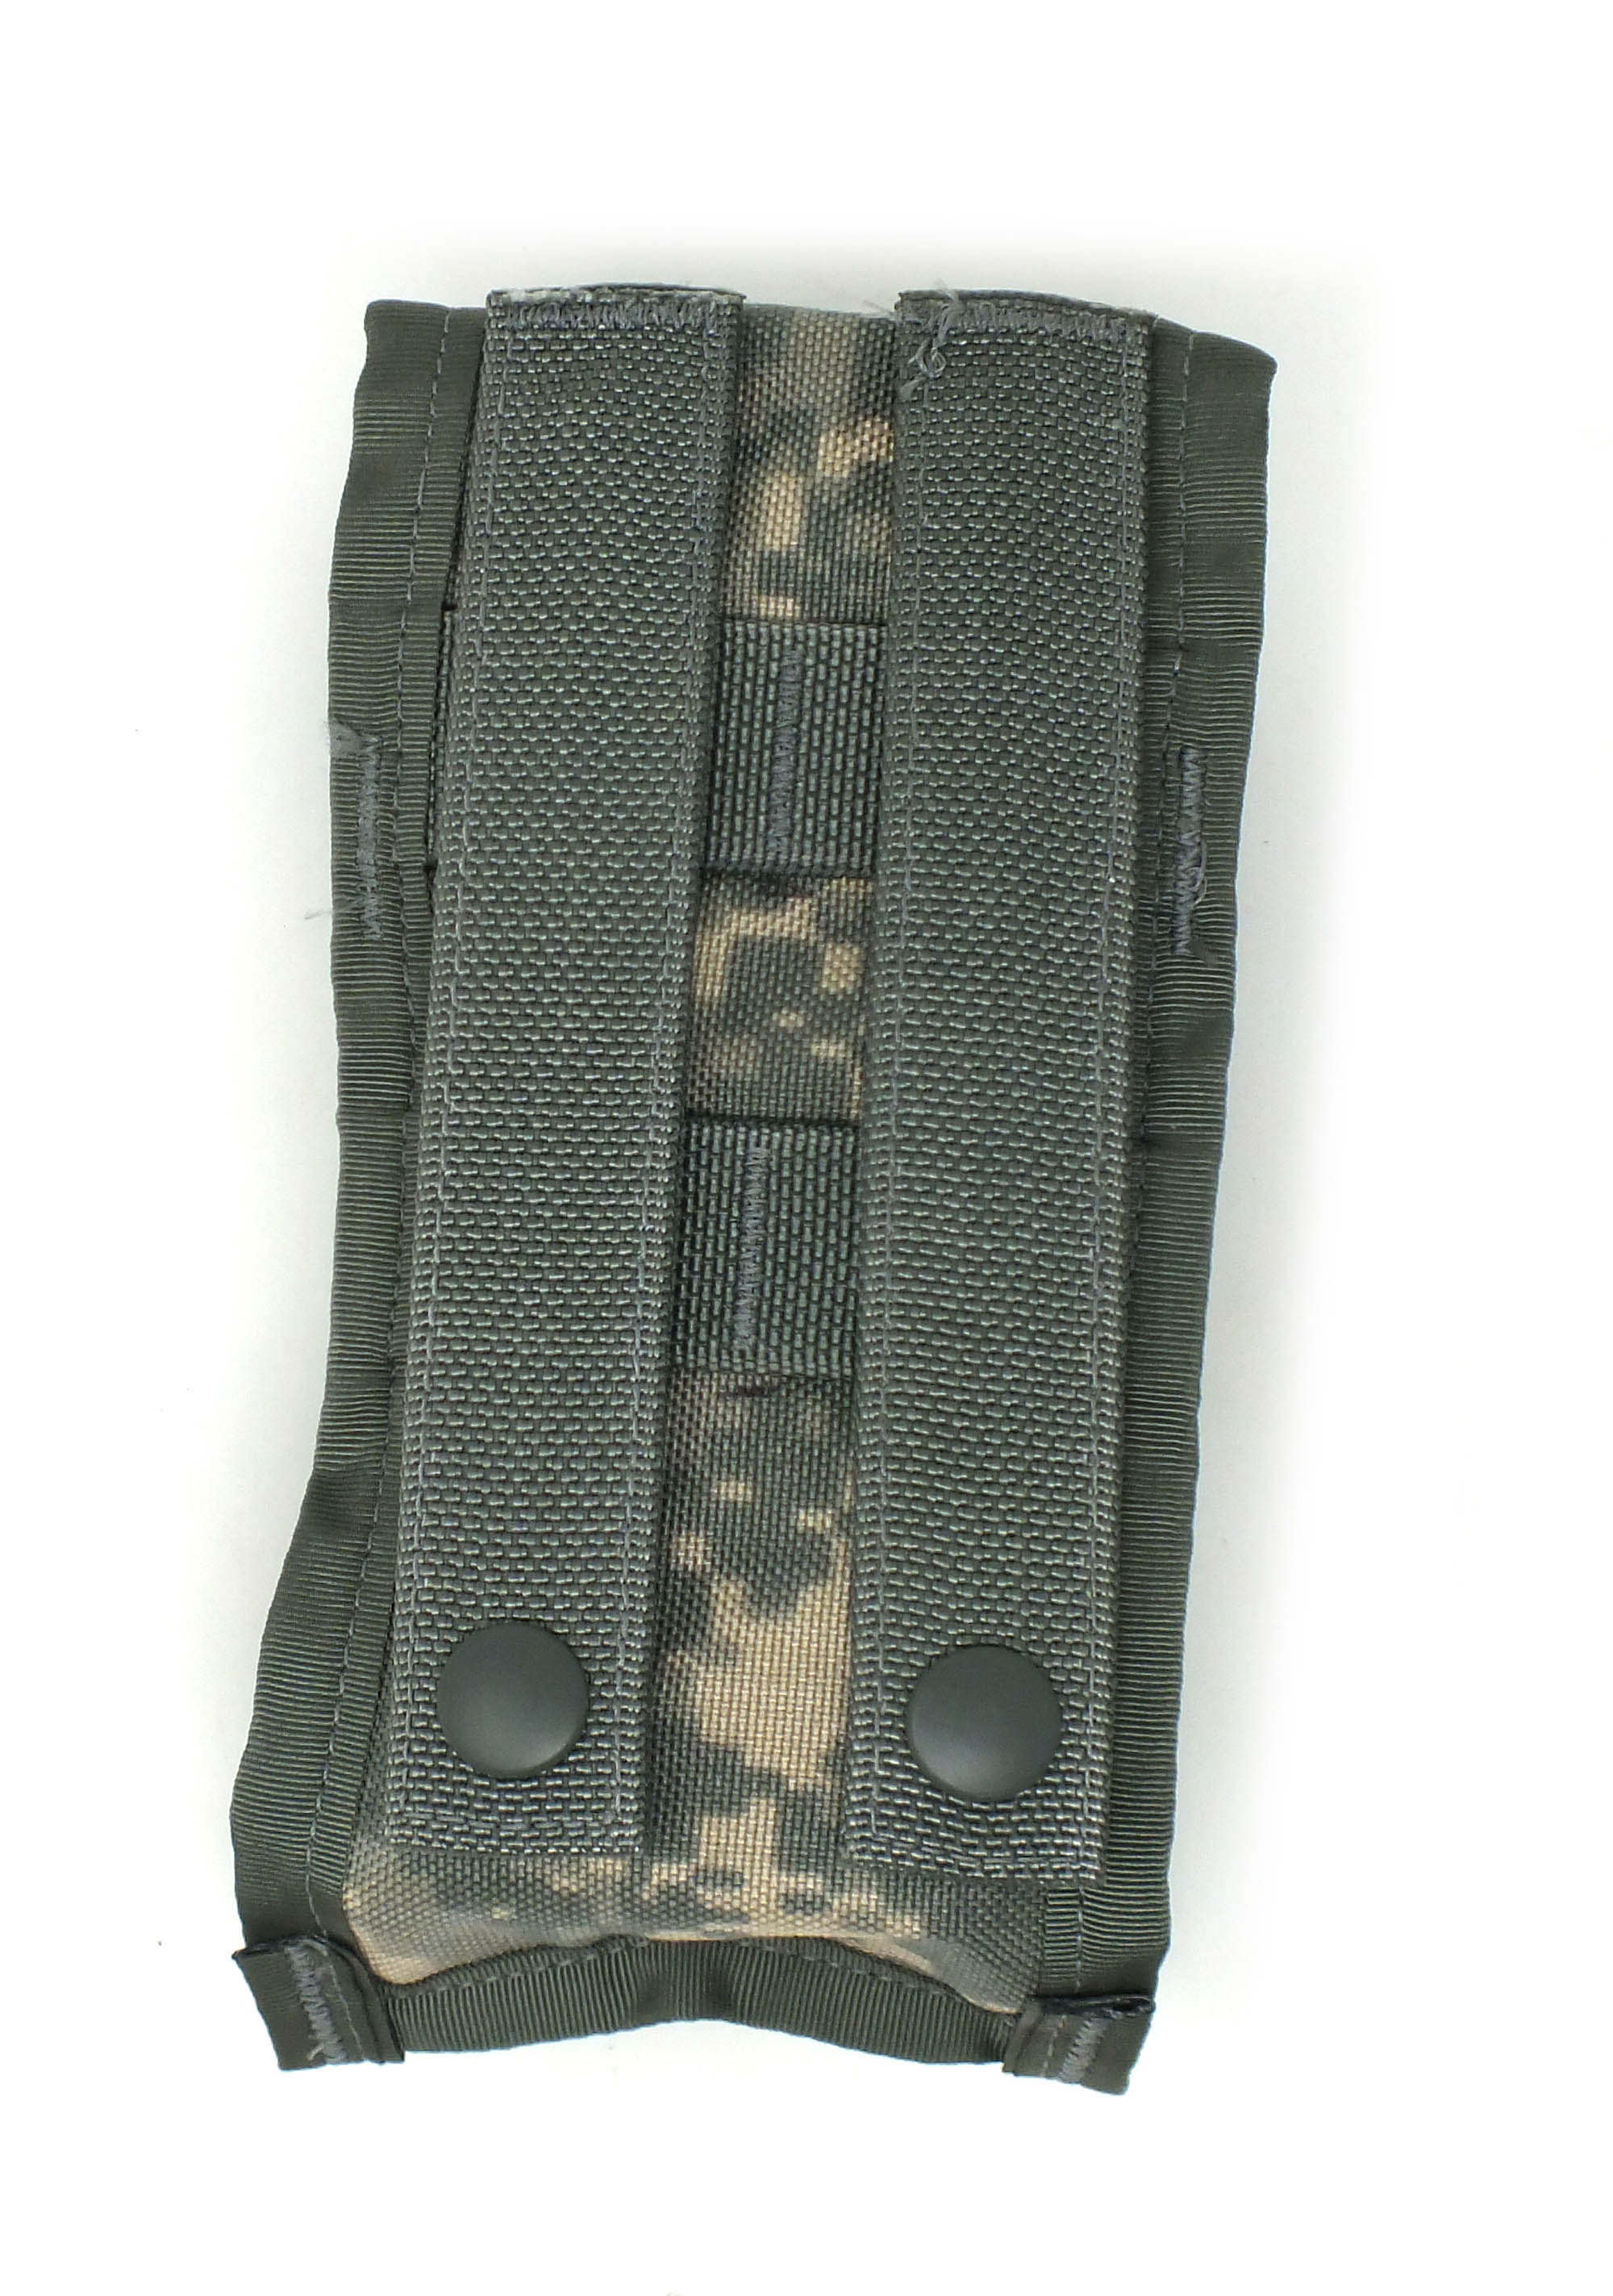 US ARMY Double Magazin ACU MOLLE Ammo Pouch UCP Tasche AT Digital 